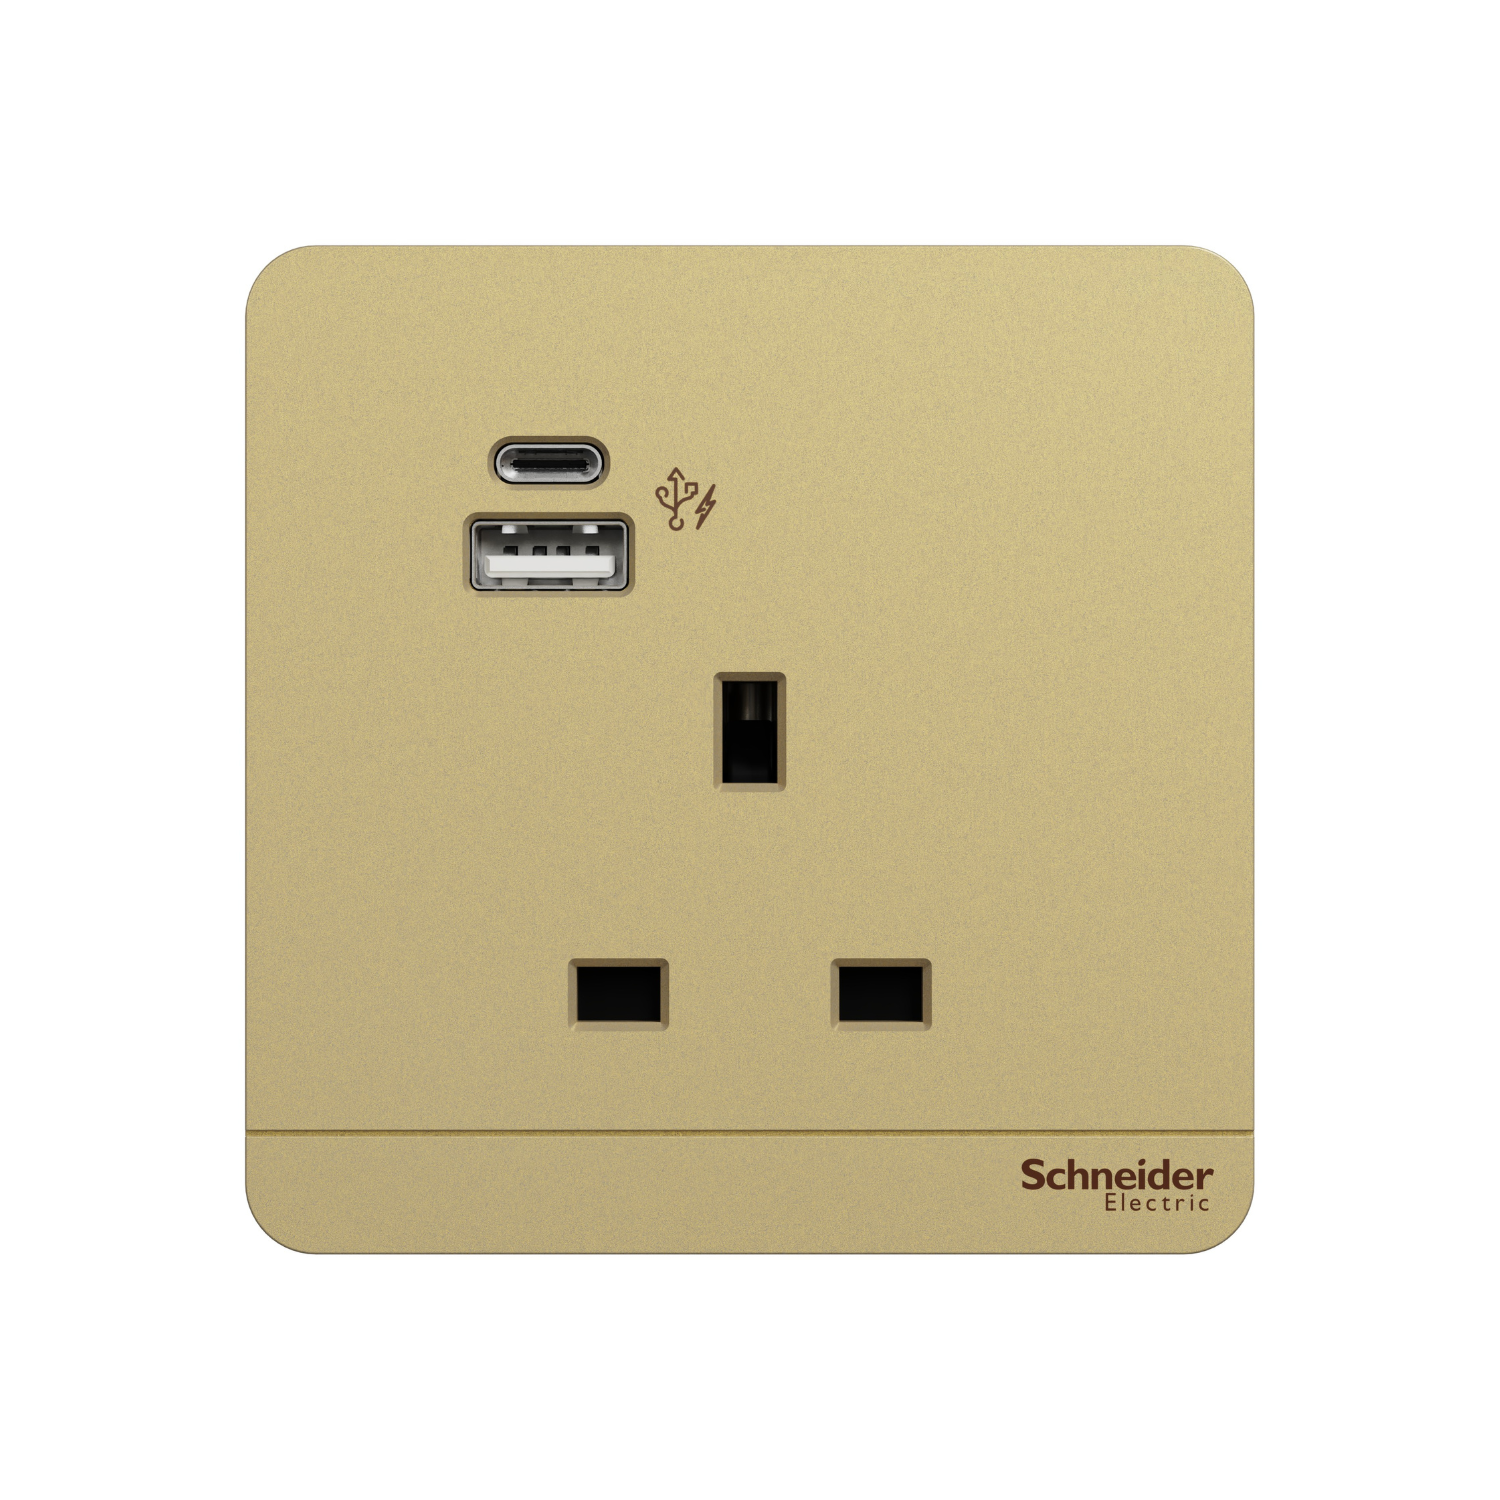 AvatarOn 13A 1 Gang Socket with 2 Gang USB Fast Charger Socket Type A+C, Wine Gold